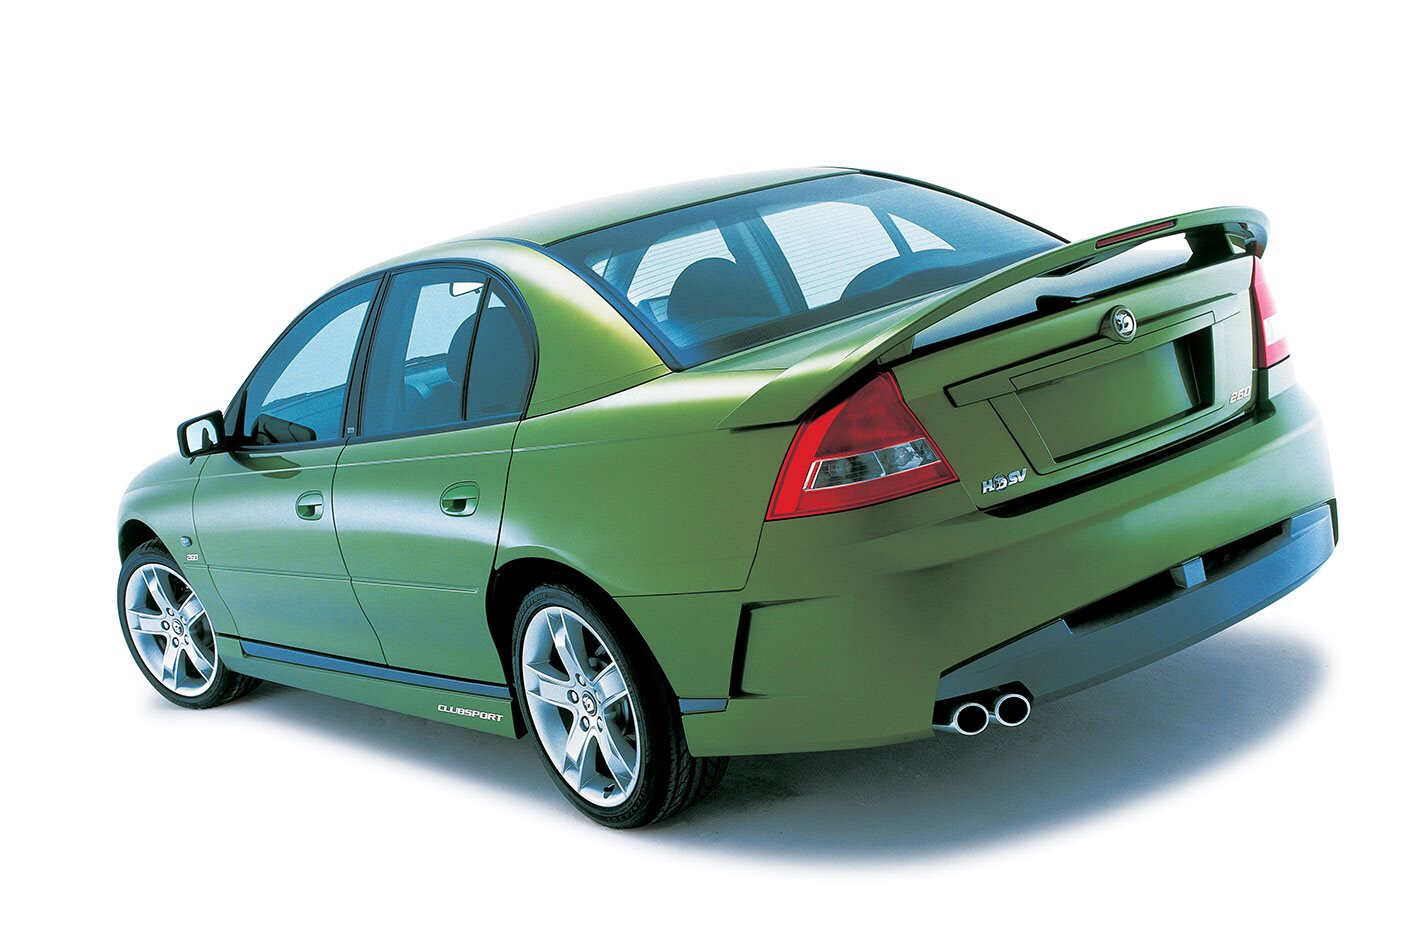 Hsv Vt Vz Clubsport Used Car Buyer S Guide